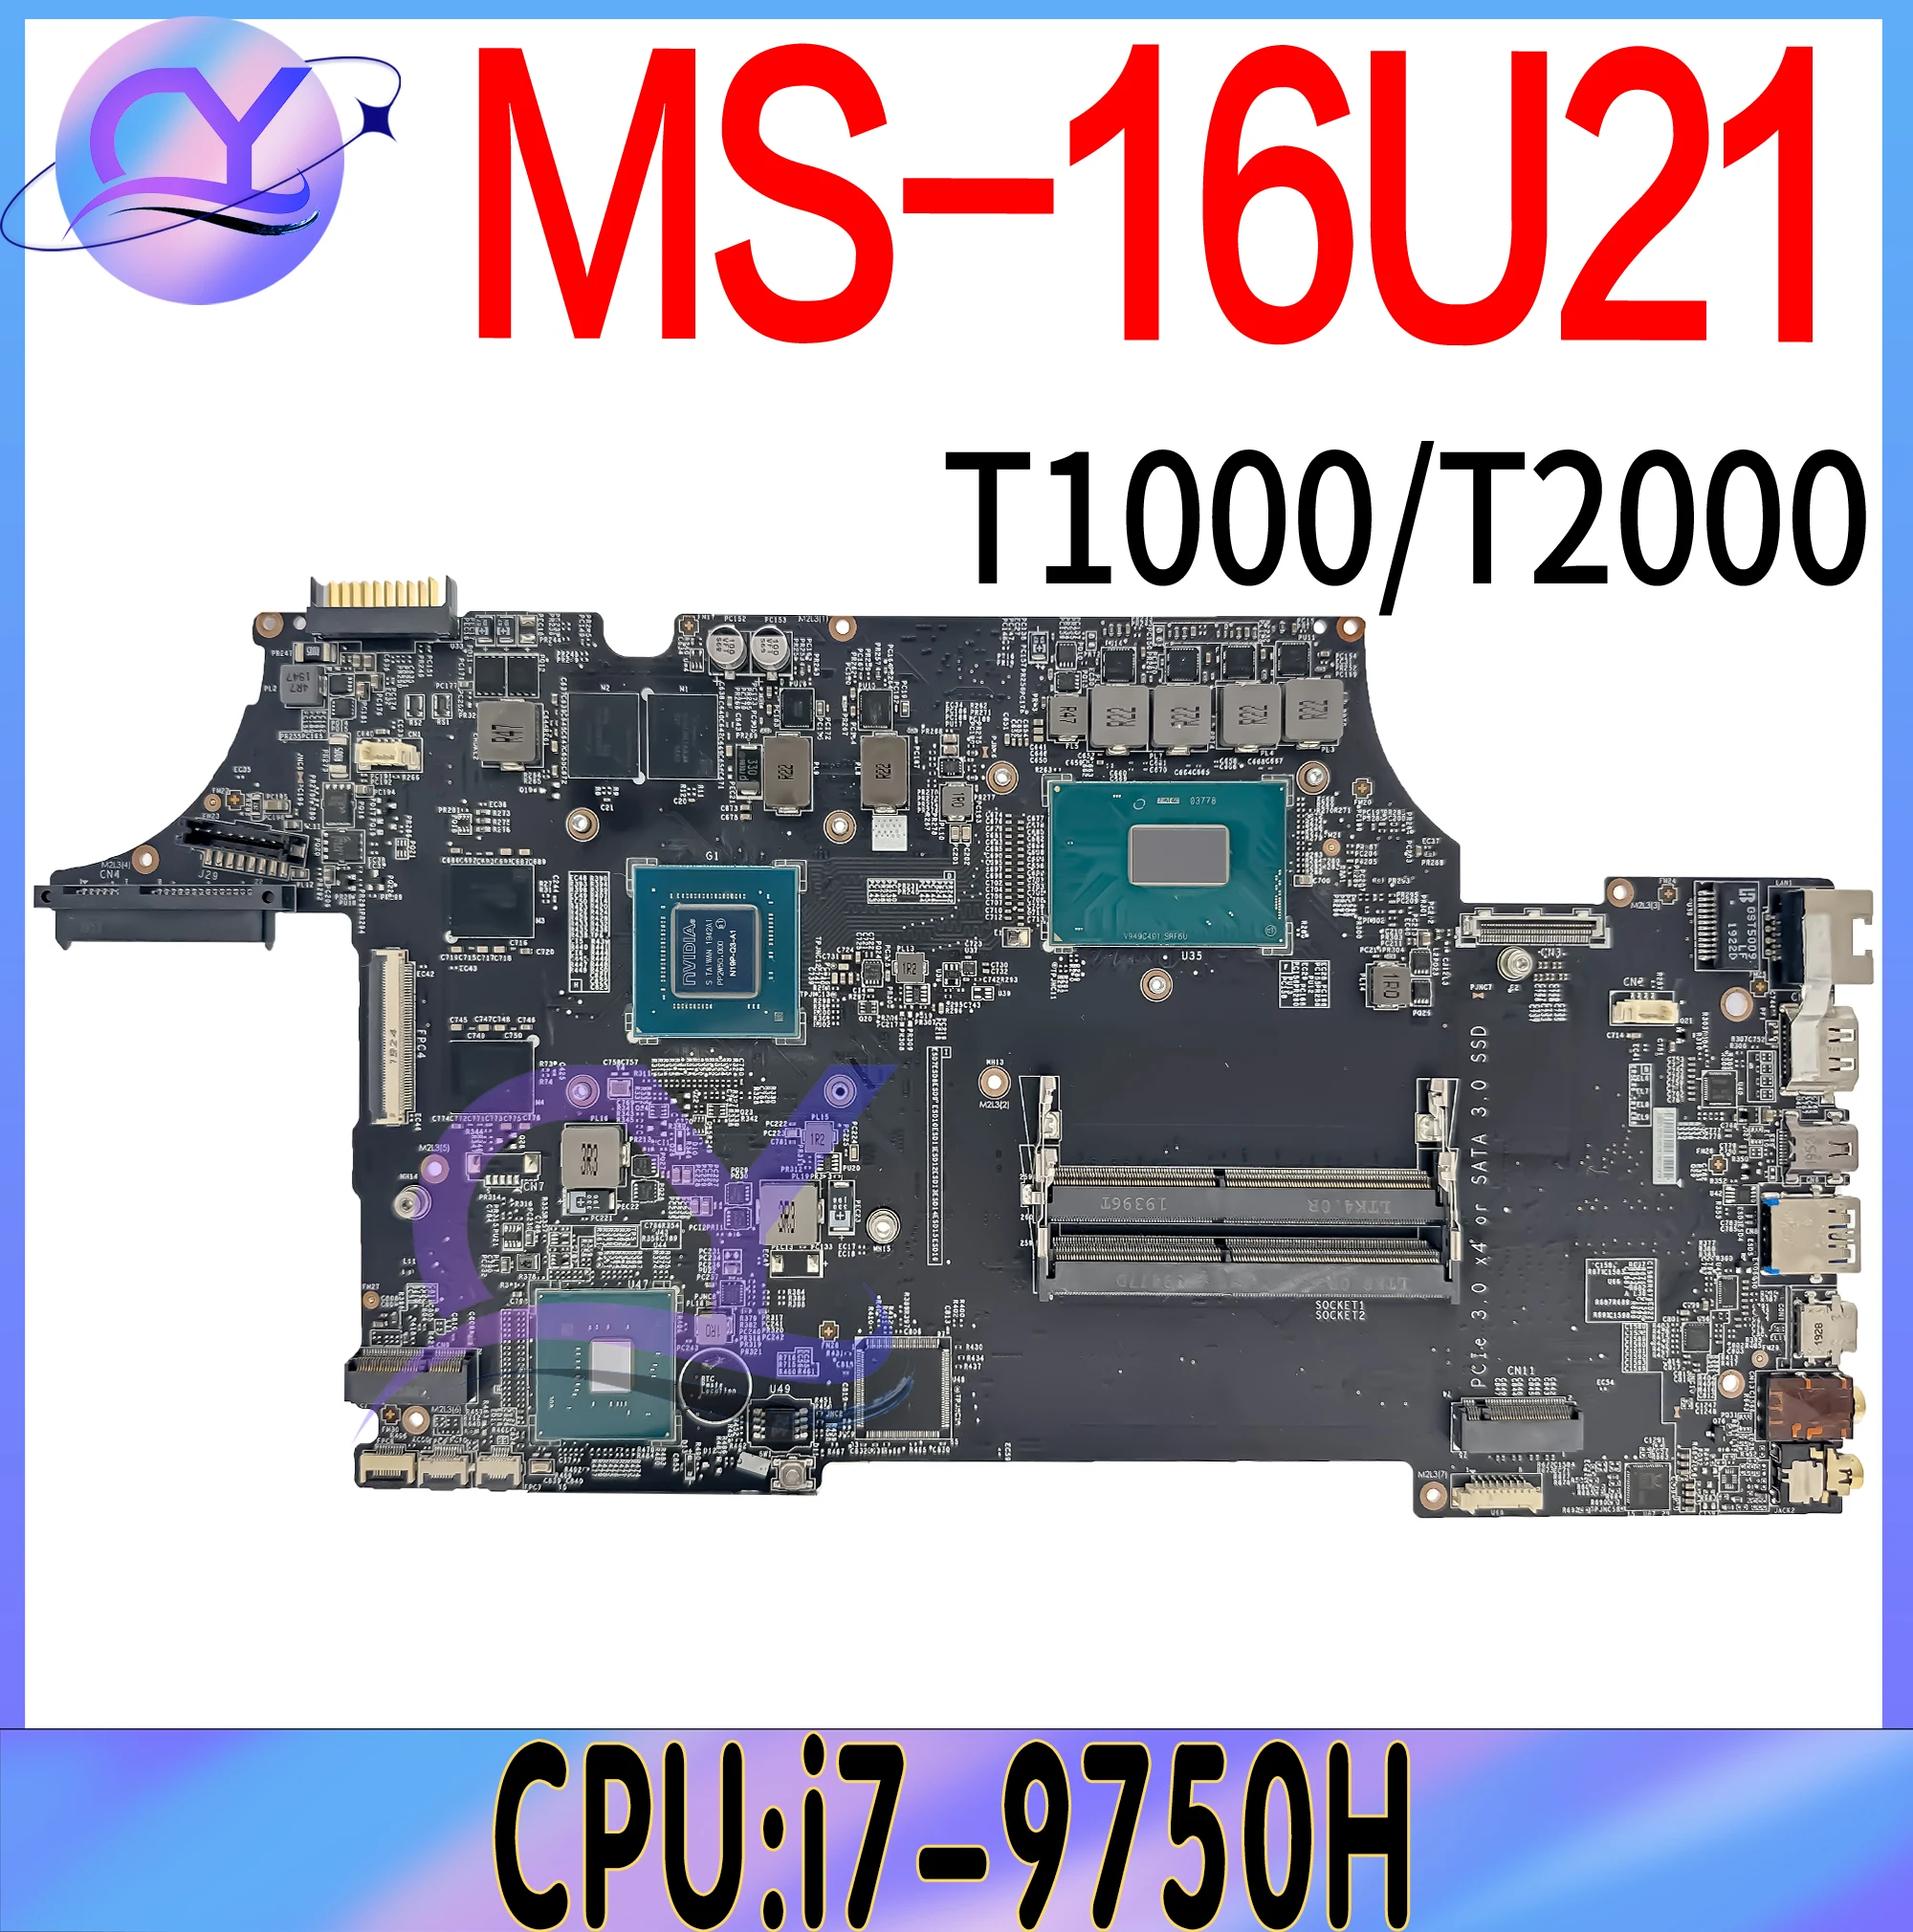 

MS-16U21 Mainboard For MSI MS-16U MS-16U2 VER:1.0 Laptop Motherboard With i7-9750H GEN And GPU T1000 T2000 100% Working Well